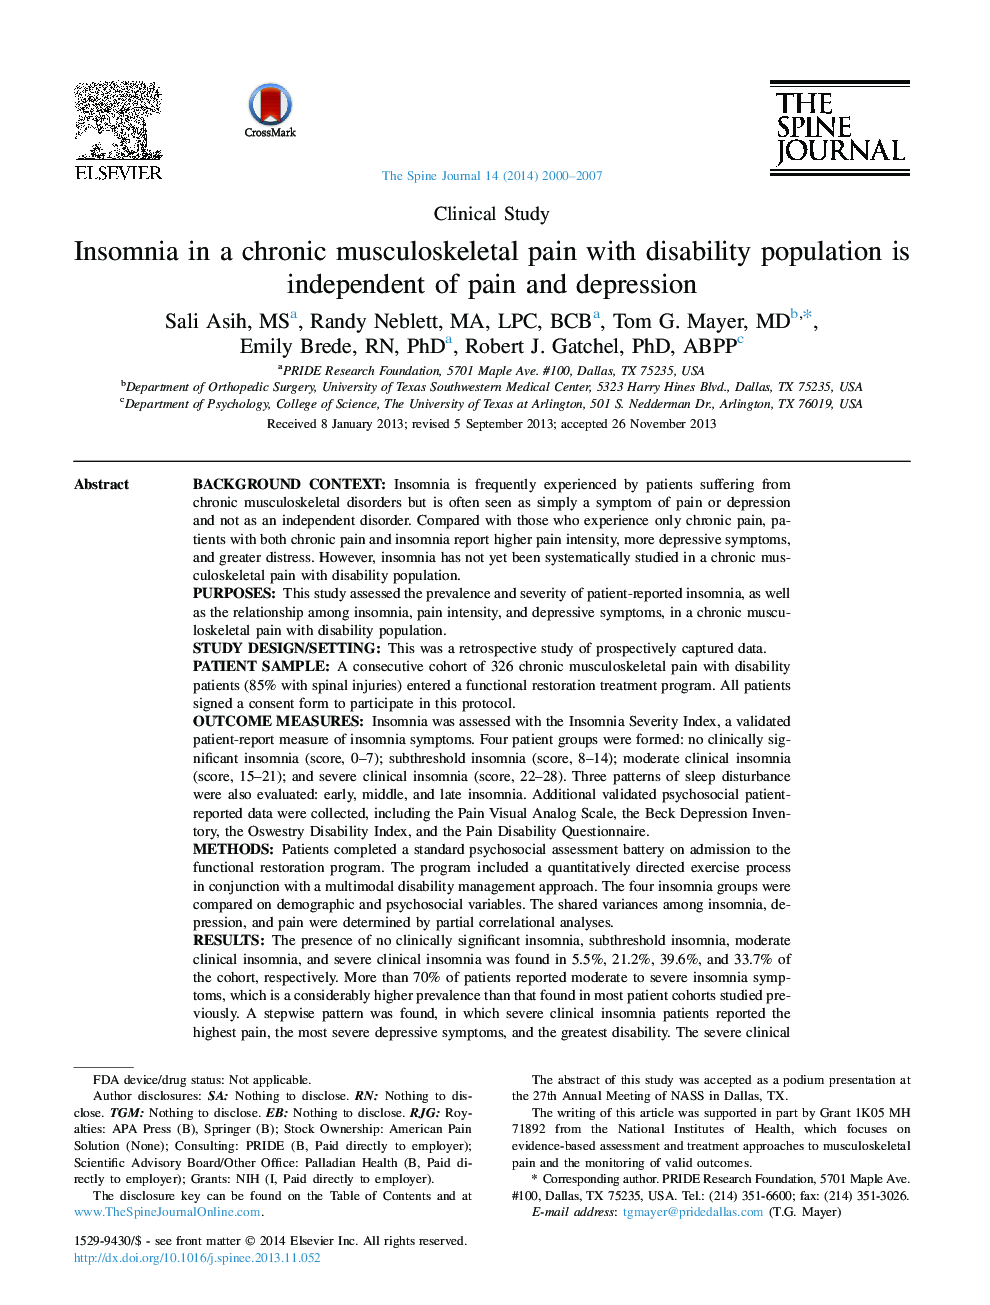 Insomnia in a chronic musculoskeletal pain with disability population is independent of pain and depression 